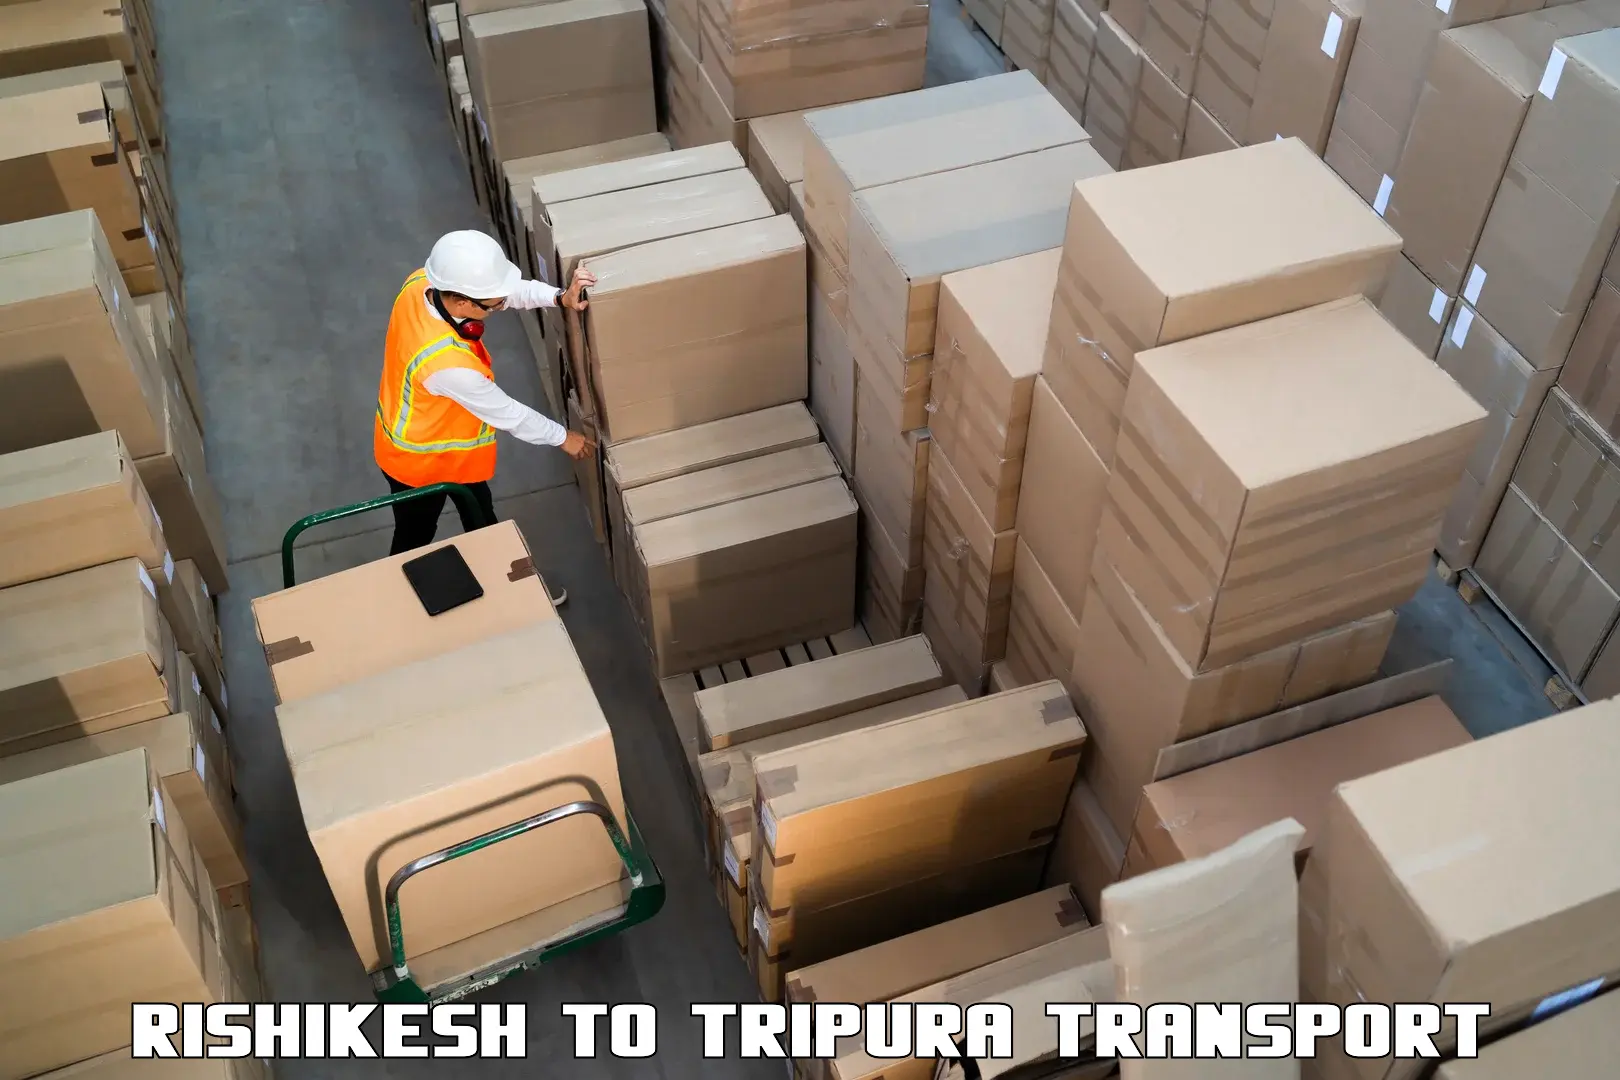 Transport shared services in Rishikesh to Udaipur Tripura